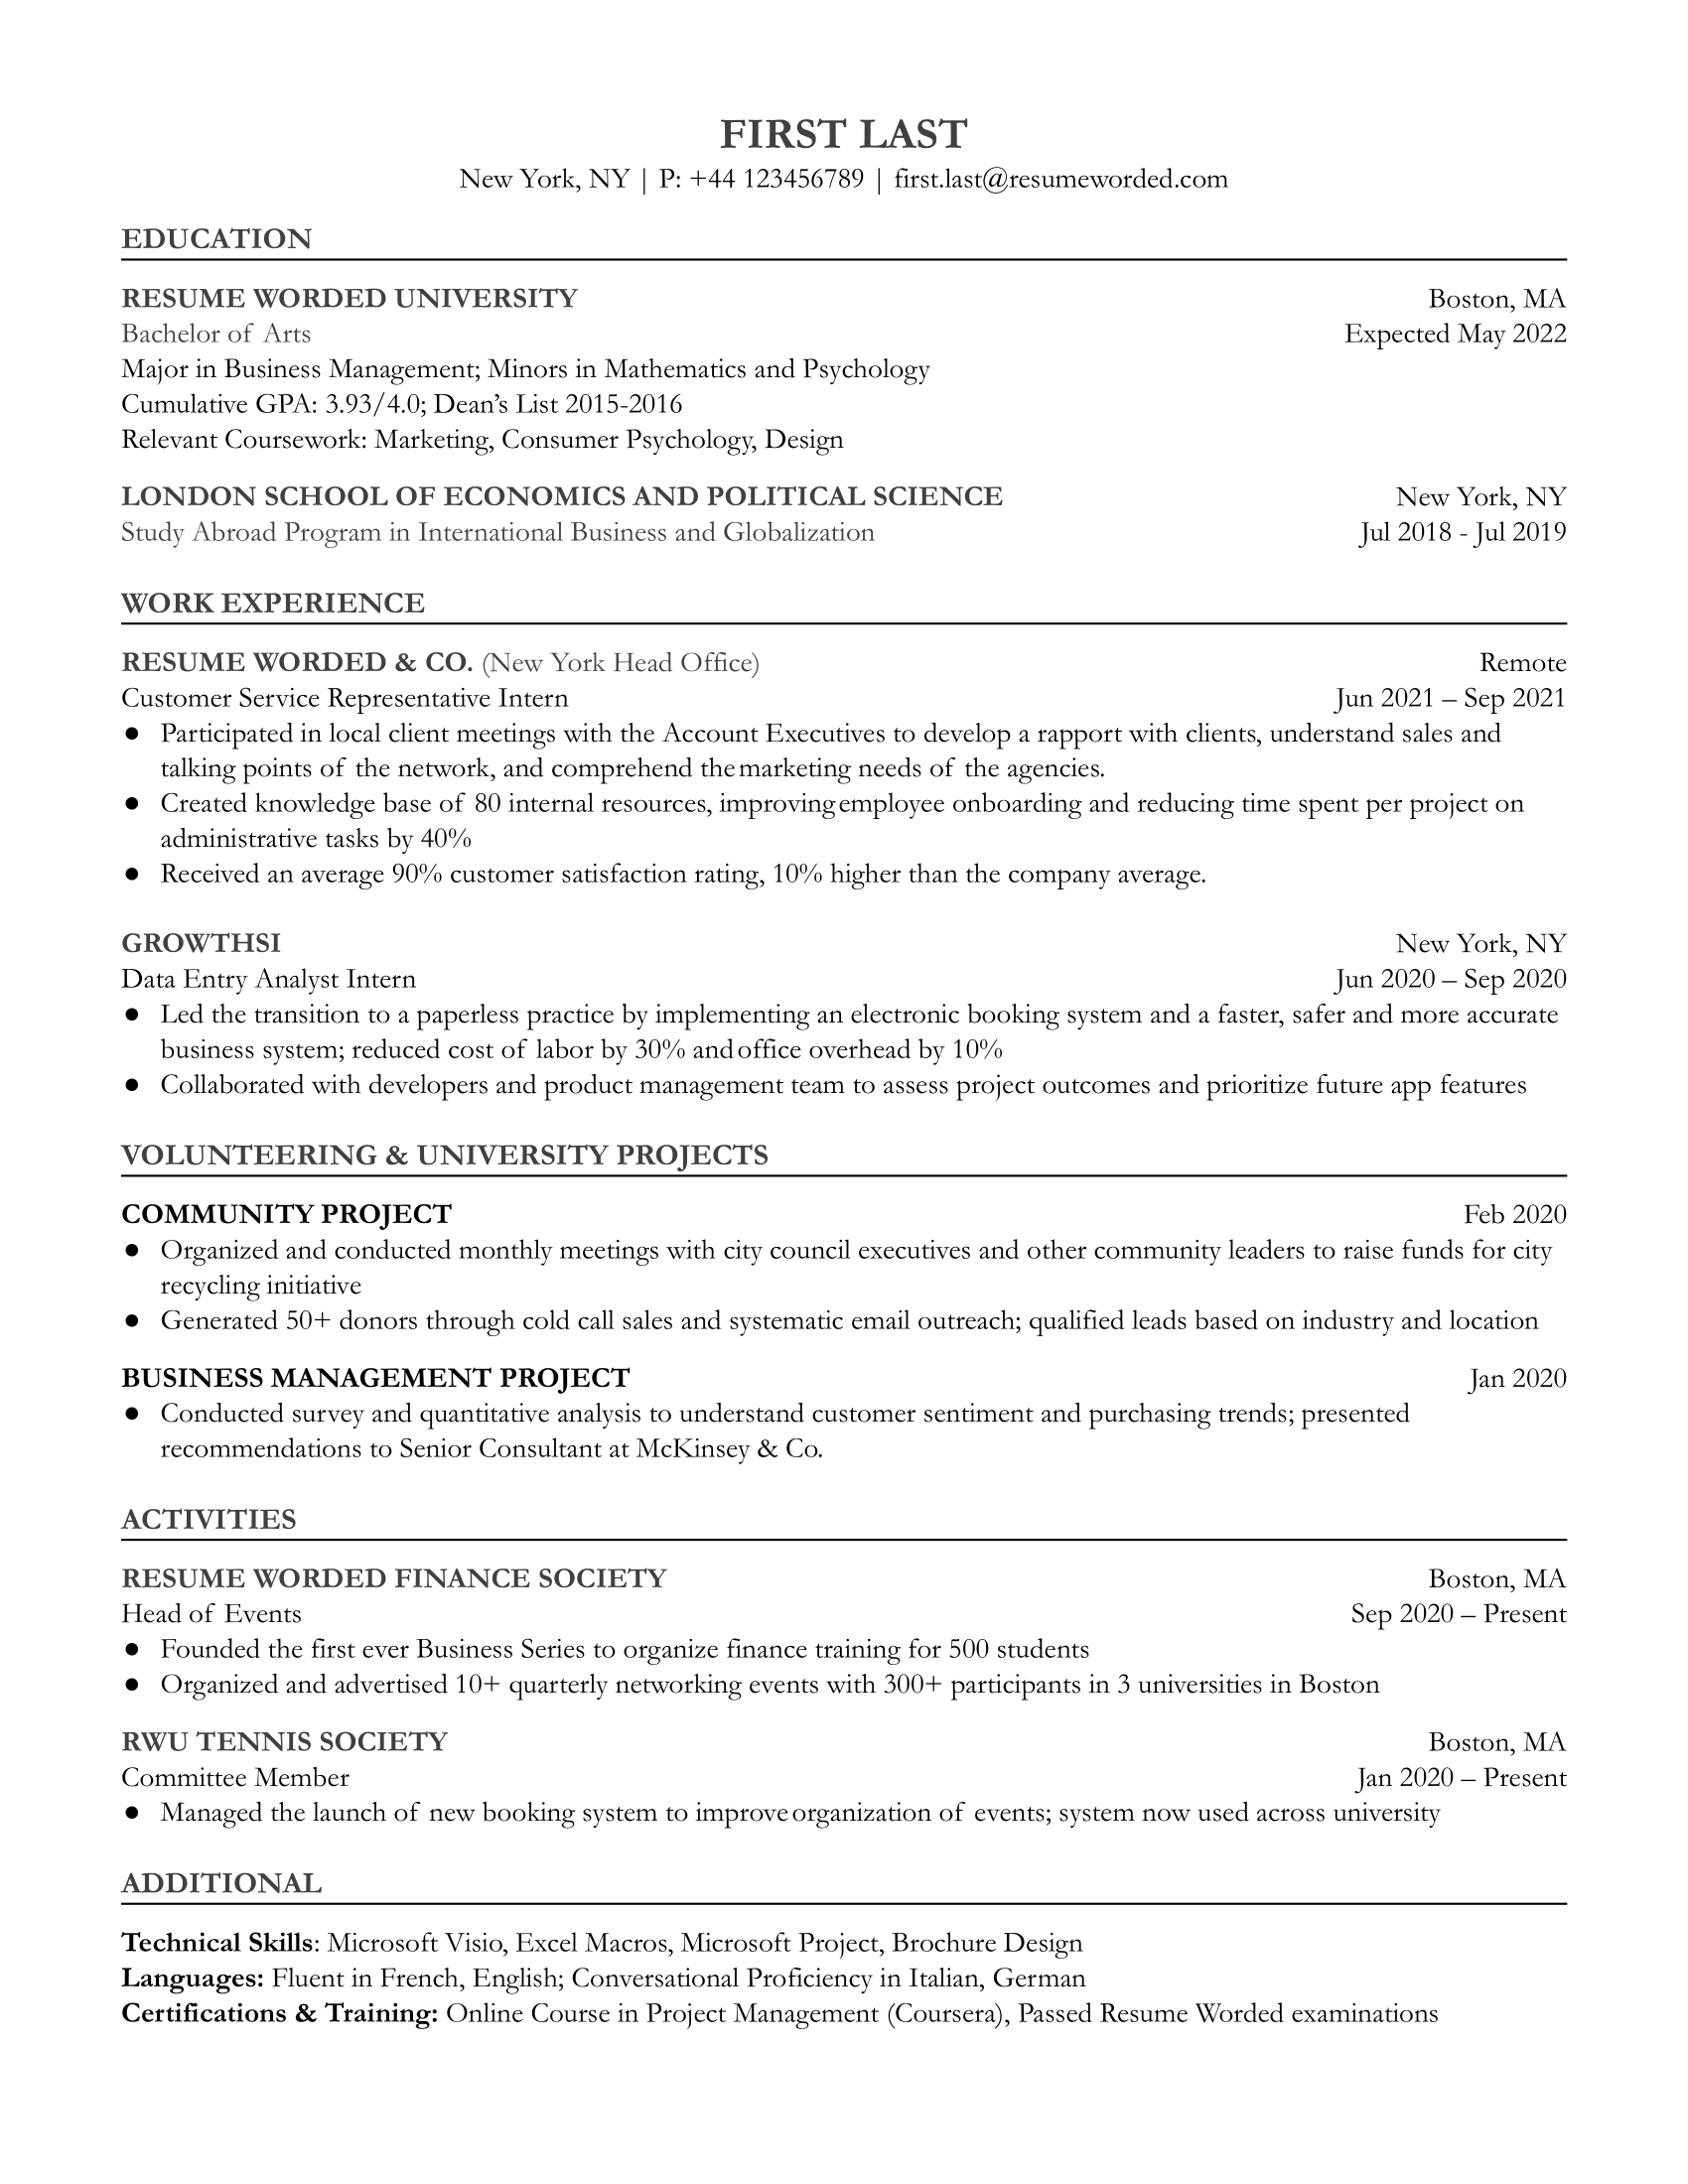 An exemplary resume for an Entry Level Customer Service Representative role.